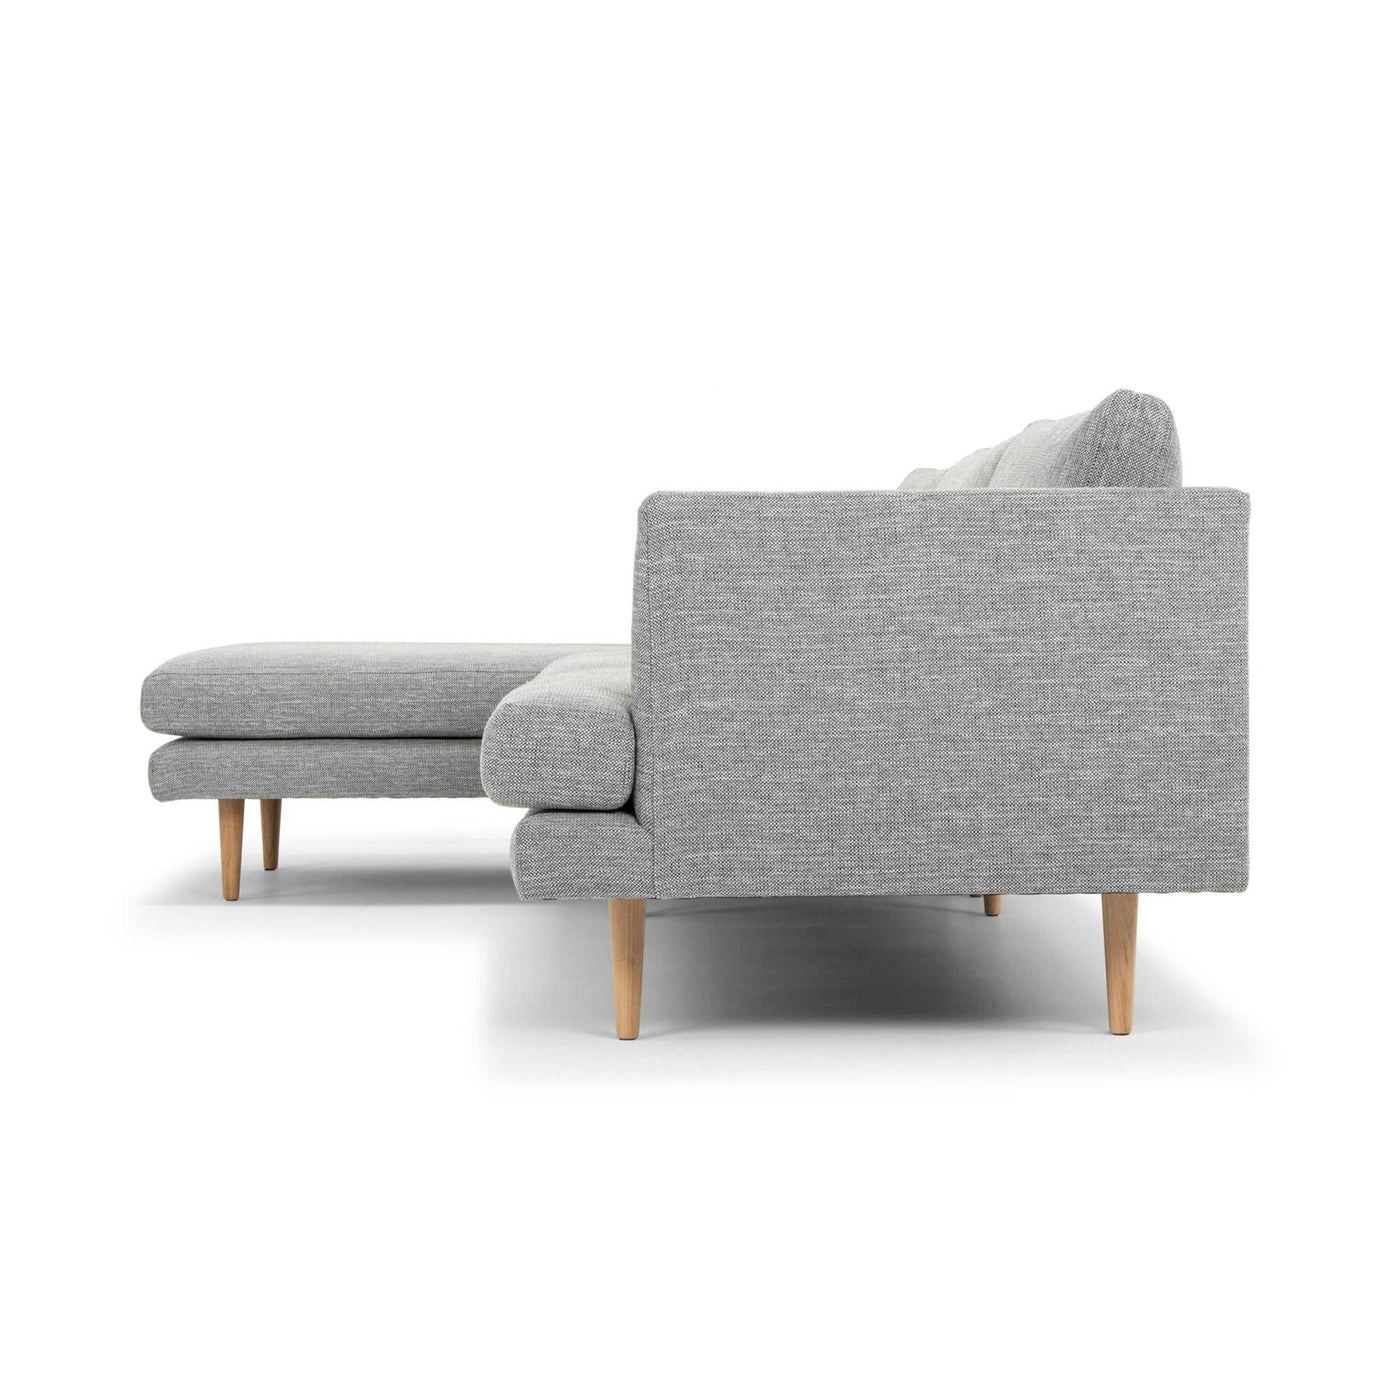 Seater With Left Chaise Sofa - Graphite Grey with Natural Legs